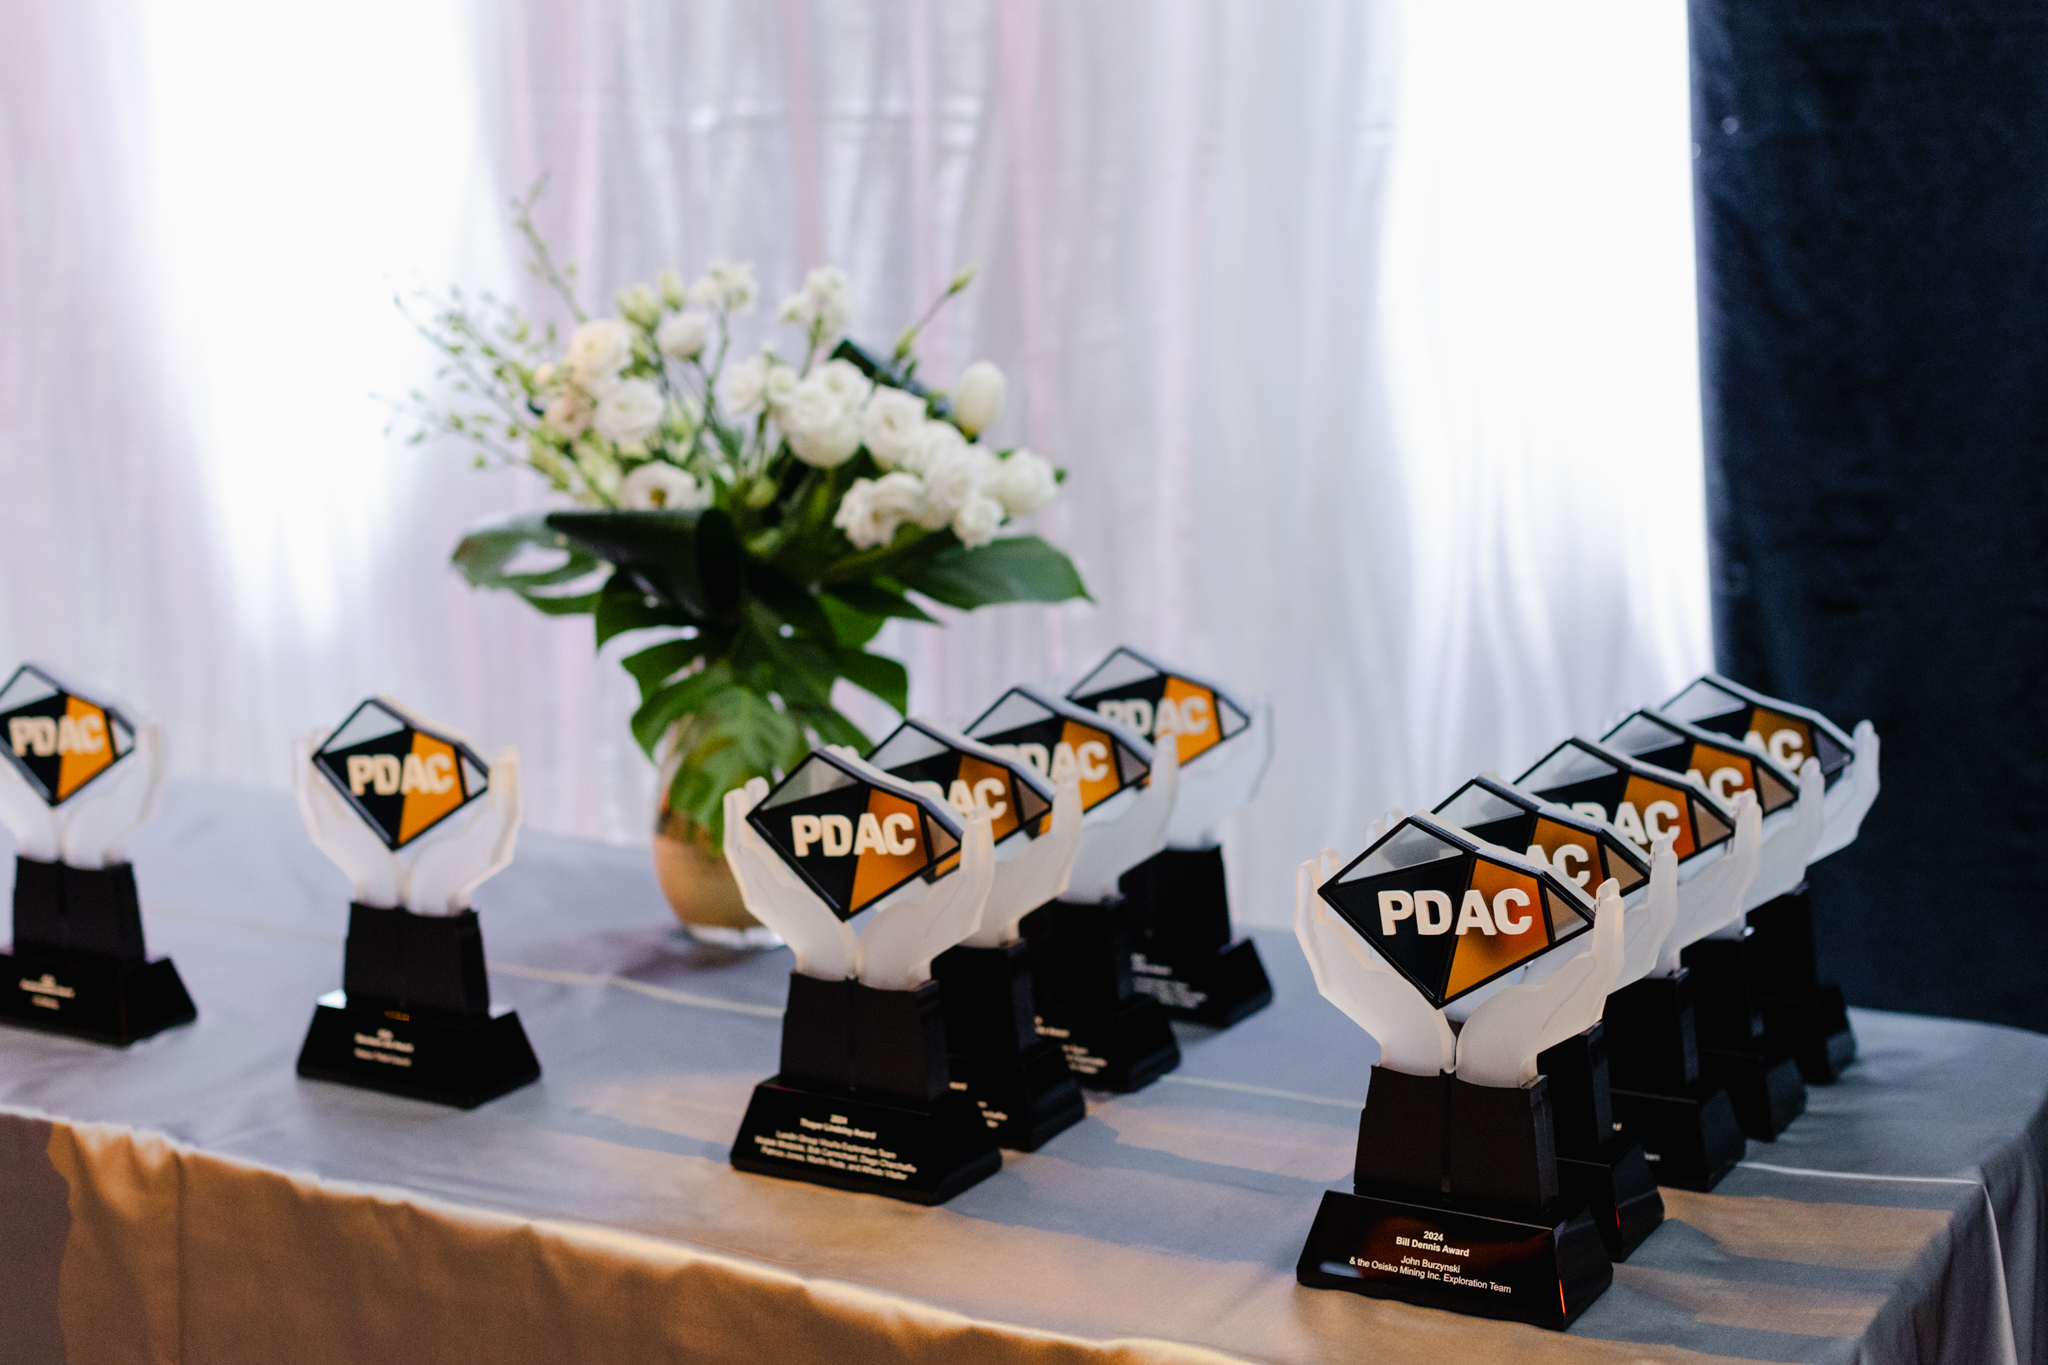 A table full of awards captured in event photography on a table.